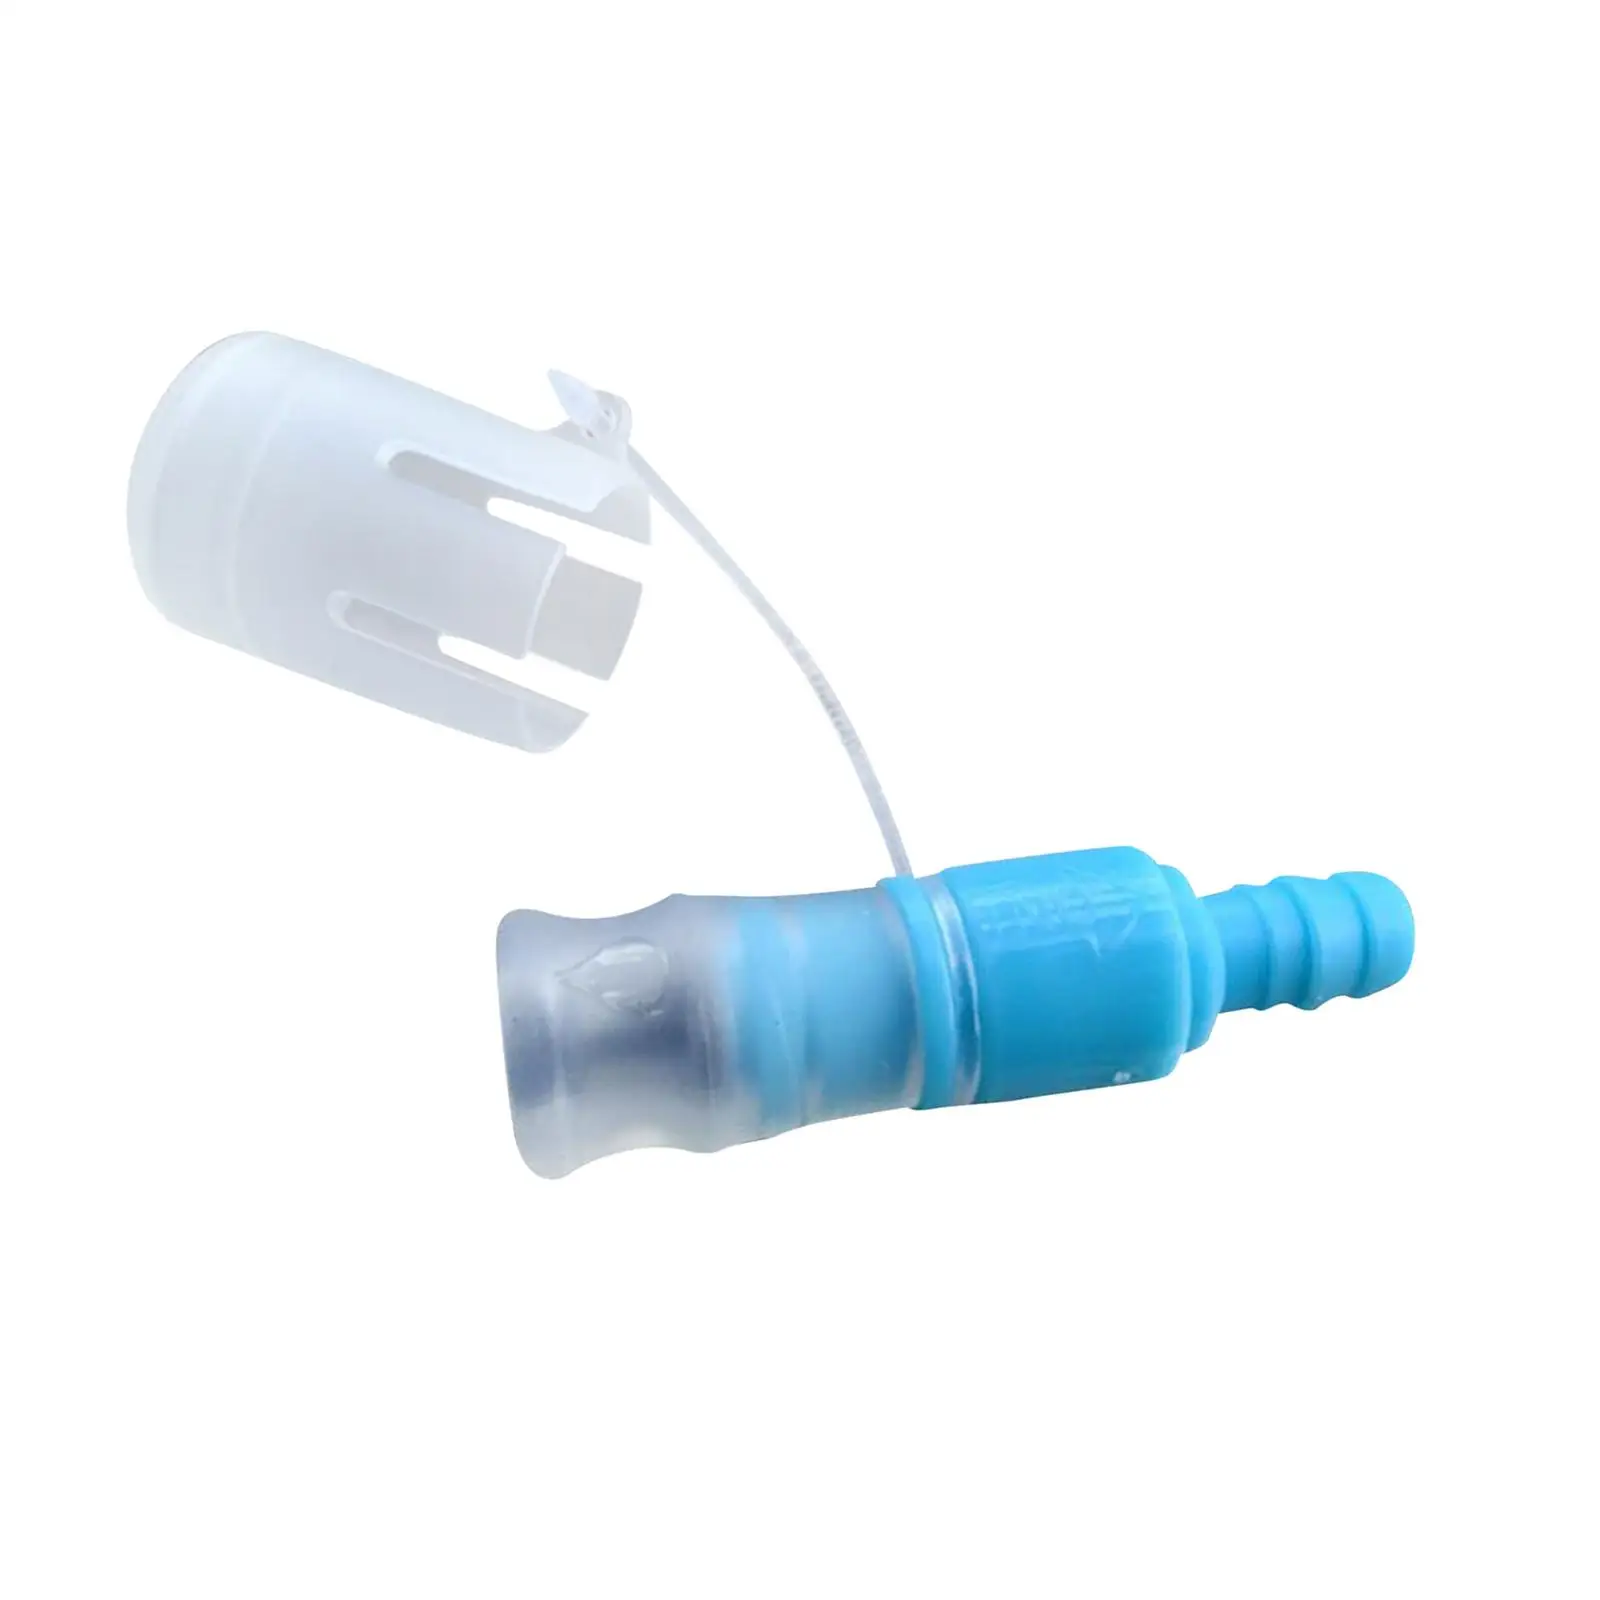 Bladder Water Bag Bite with Switch with Dustproof Cover Mouthpiece Nozzle Quick Access for Pack